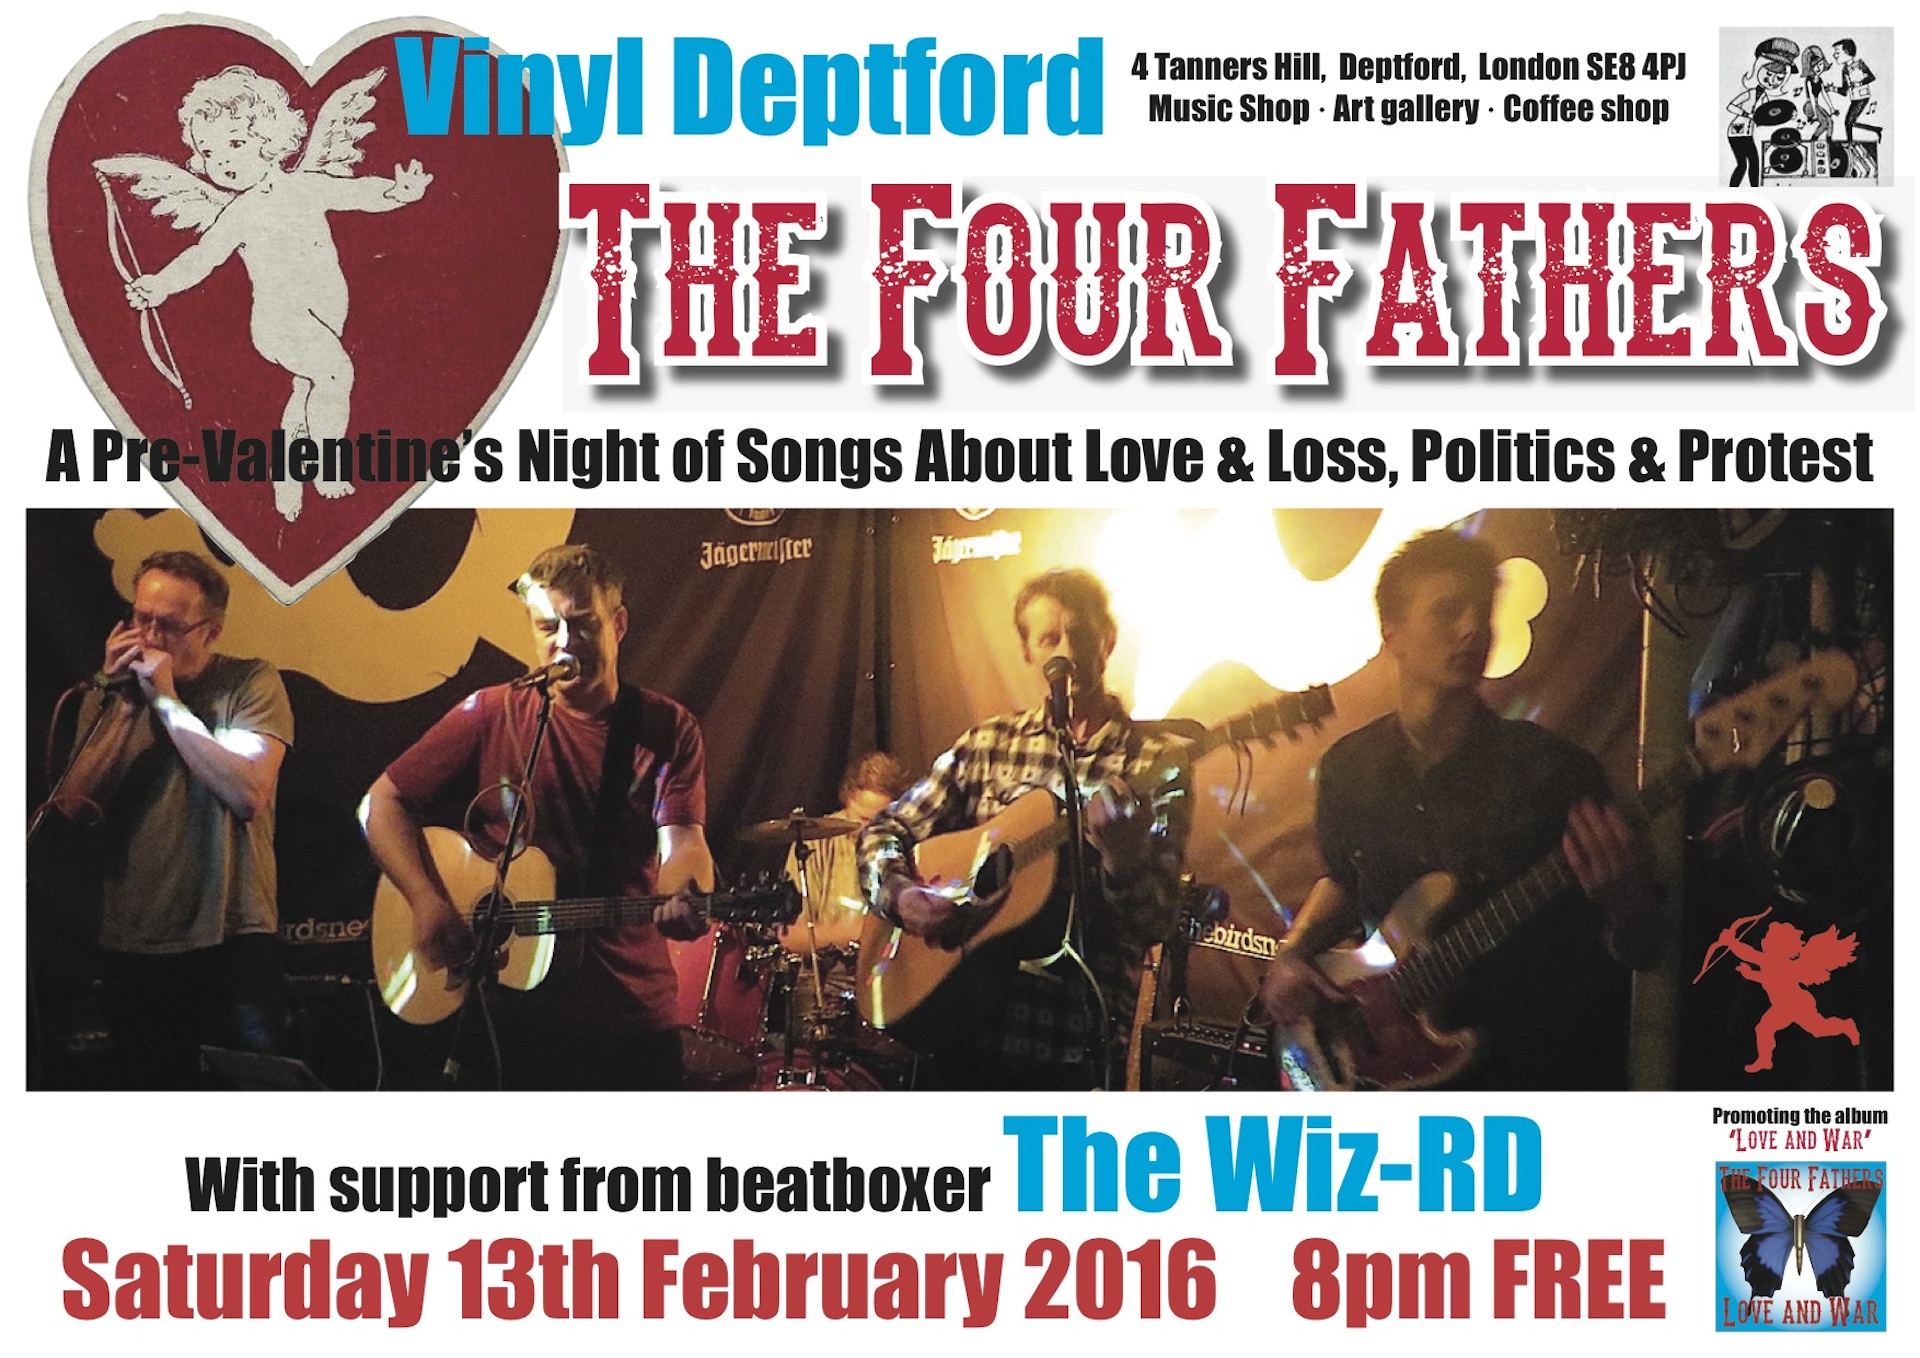 The poster for Andy Worthington's band The Four Fathers' free gig at Vinyl in Deptford on Saturday February 13, 2016 (design by Brendan Horstead).